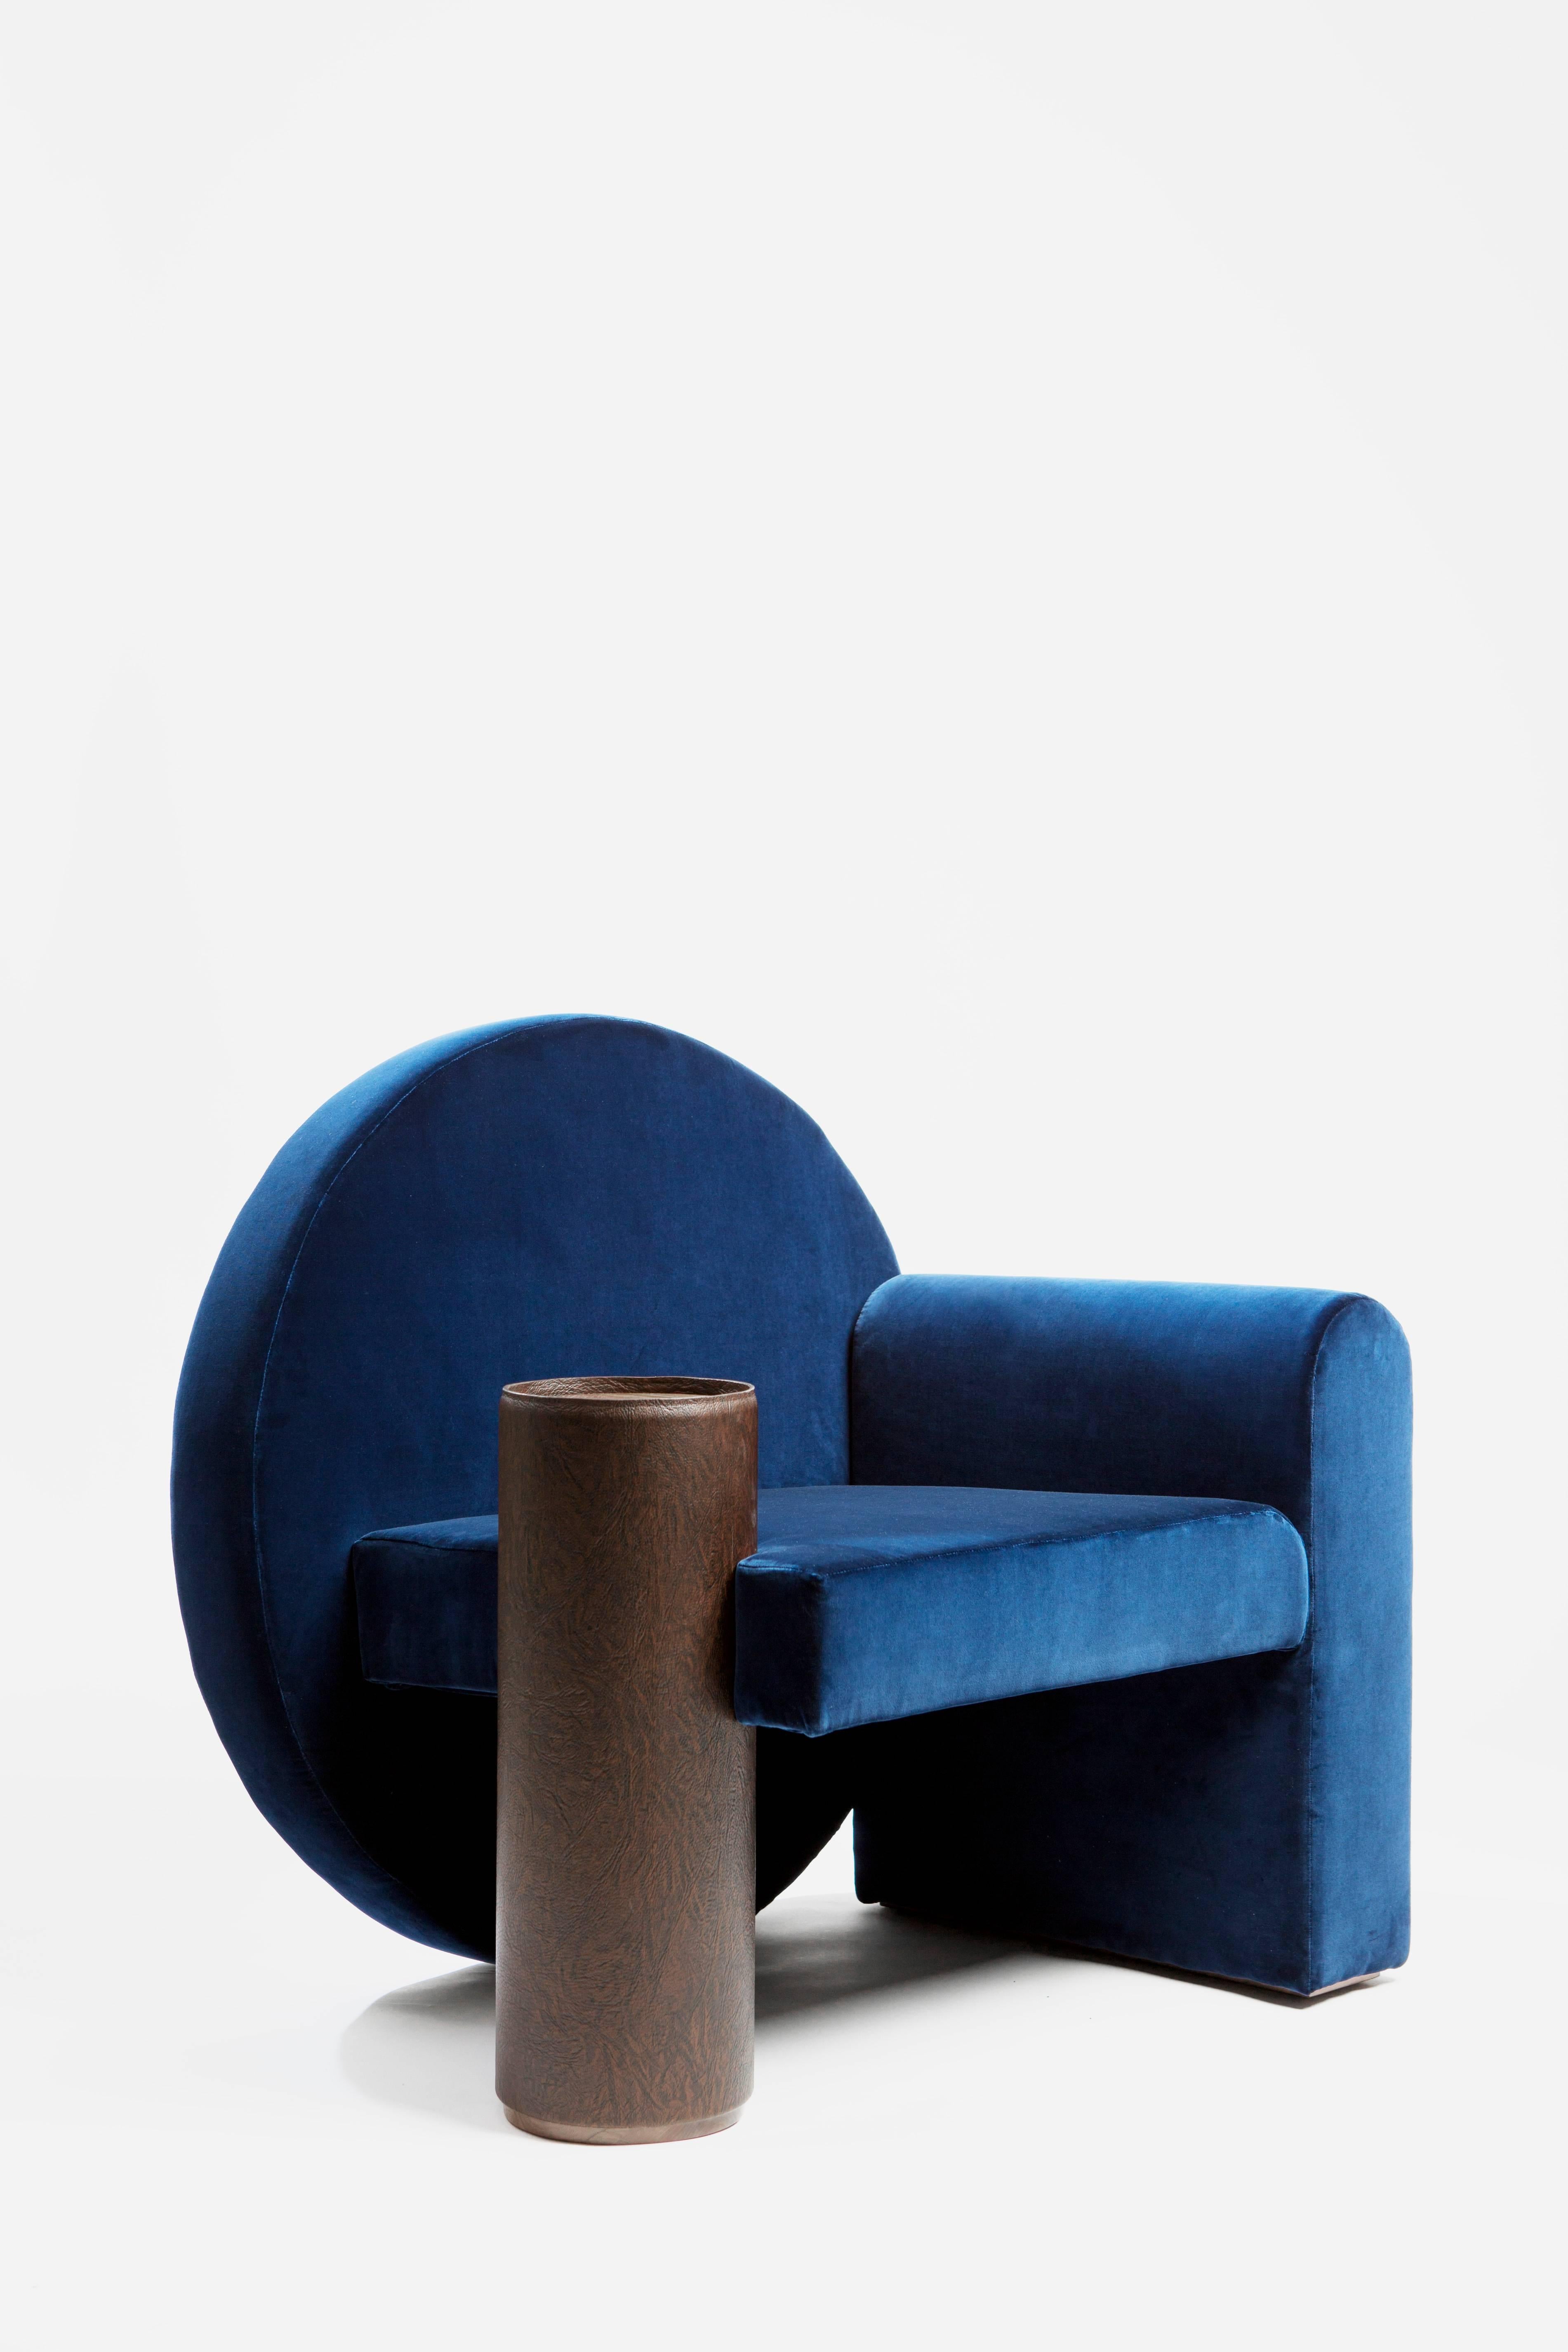 The Valsusa project, through the ancestral tradition of upholstering, shows the link between Piedmont and France. The blue velvet armchair, chosen for its comfort, with an armrest taking the role of leather and walnut shelf. 
Materials: 
Blue